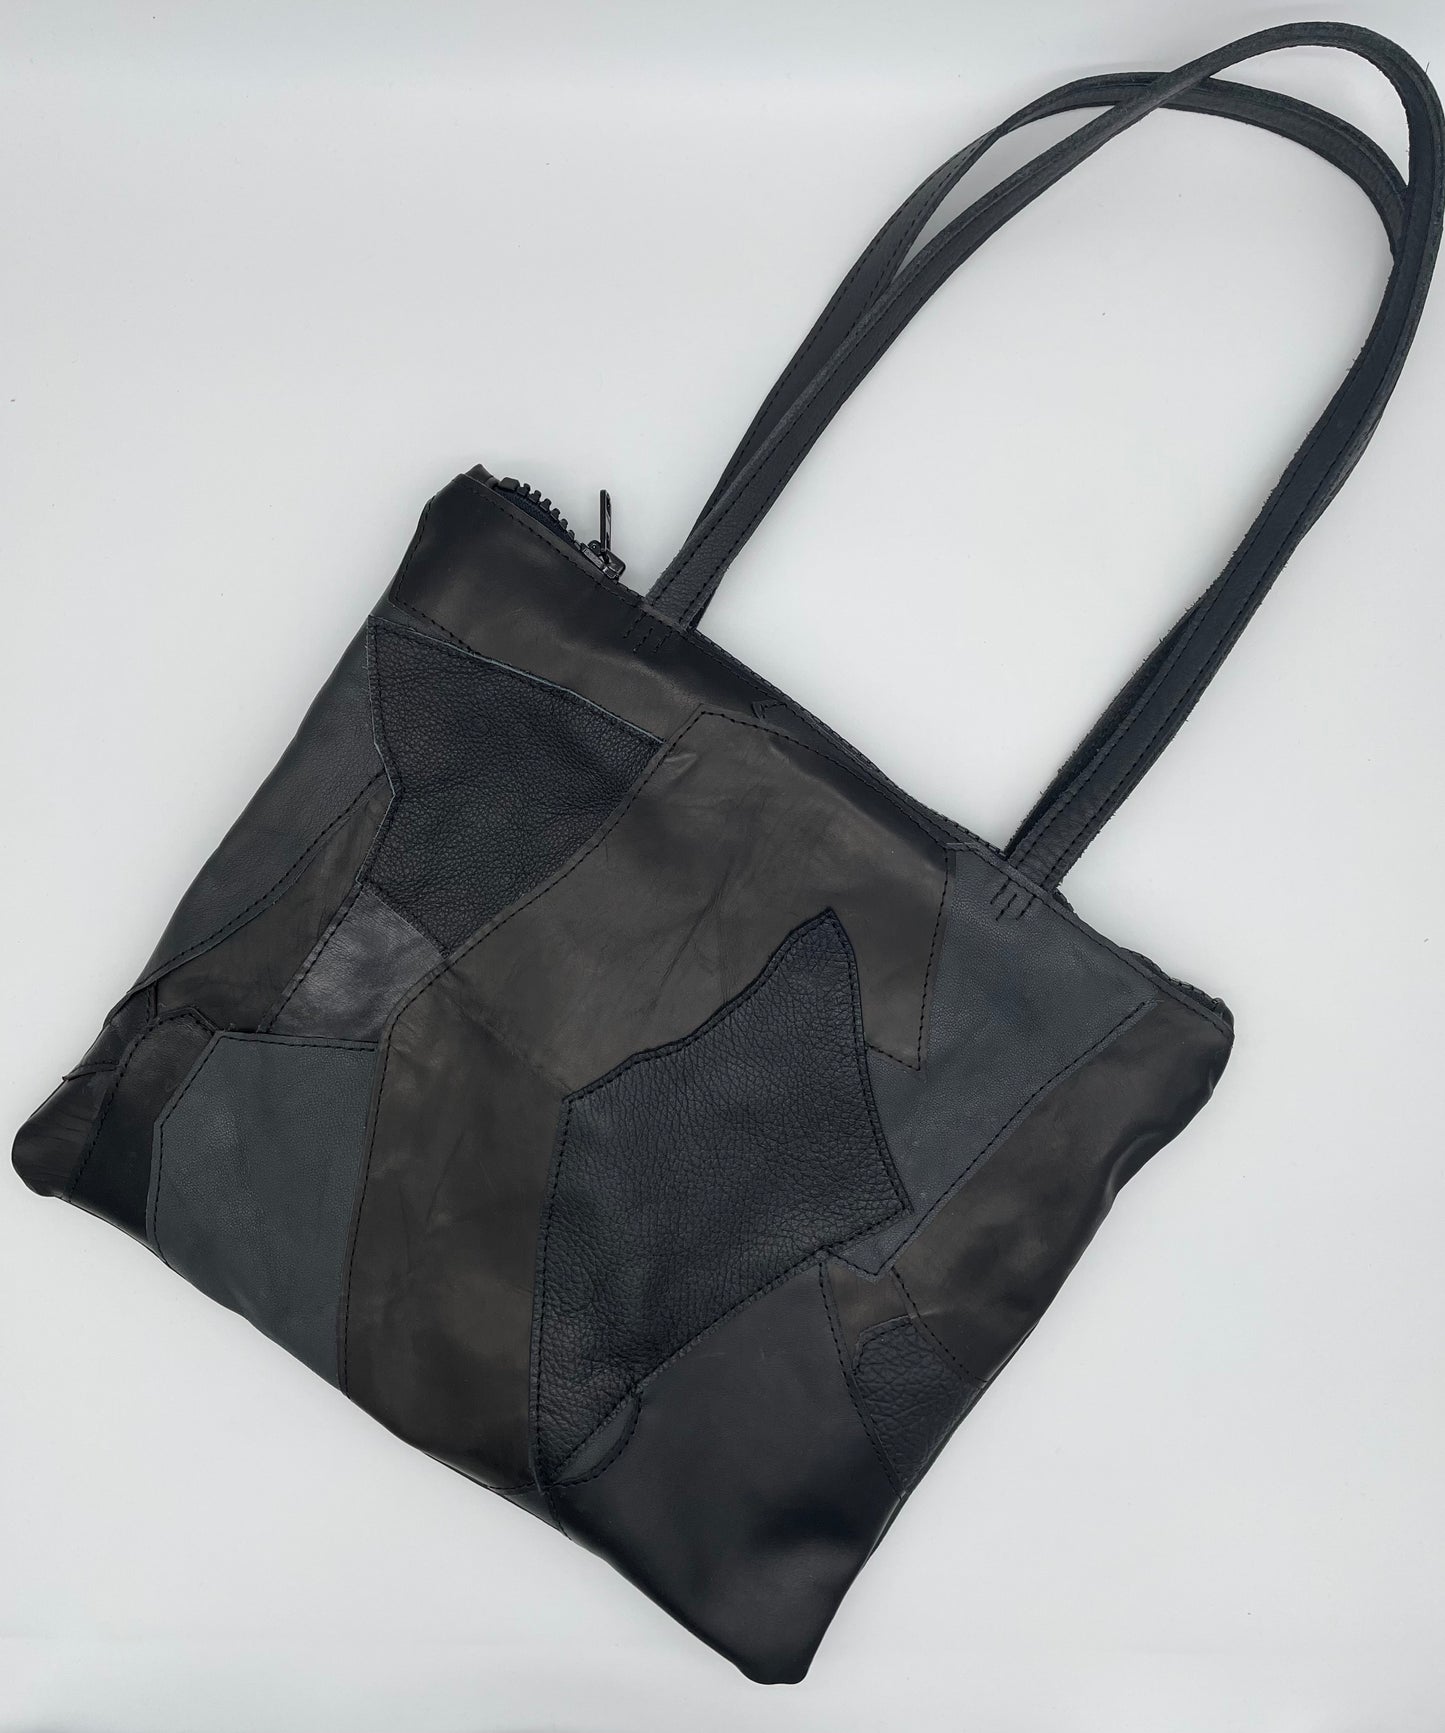 Upcycling IVE tote bag out of leather